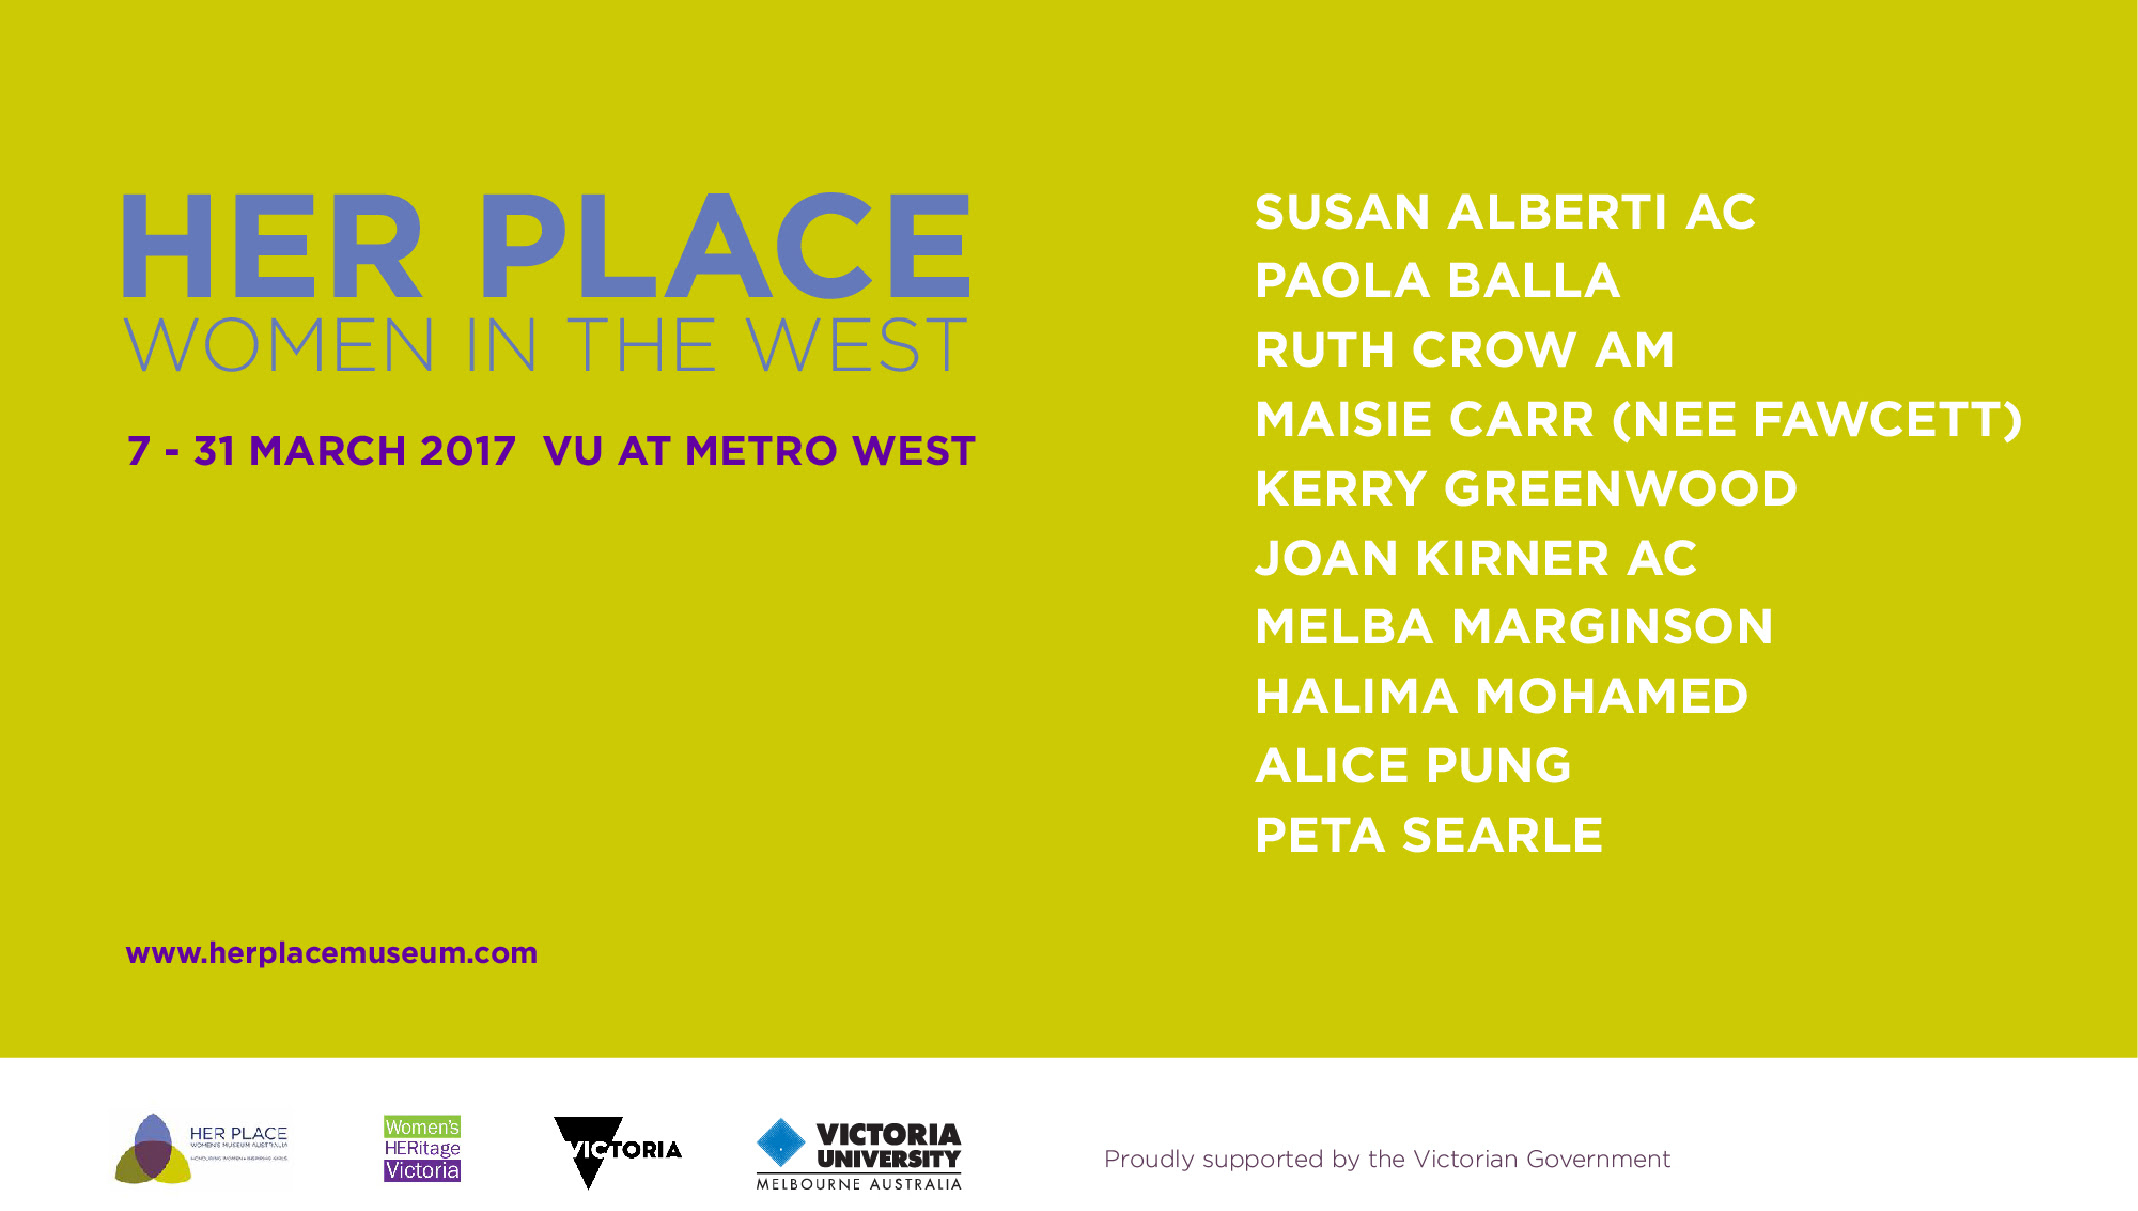 Her Place WOmen in the West Exhibition image